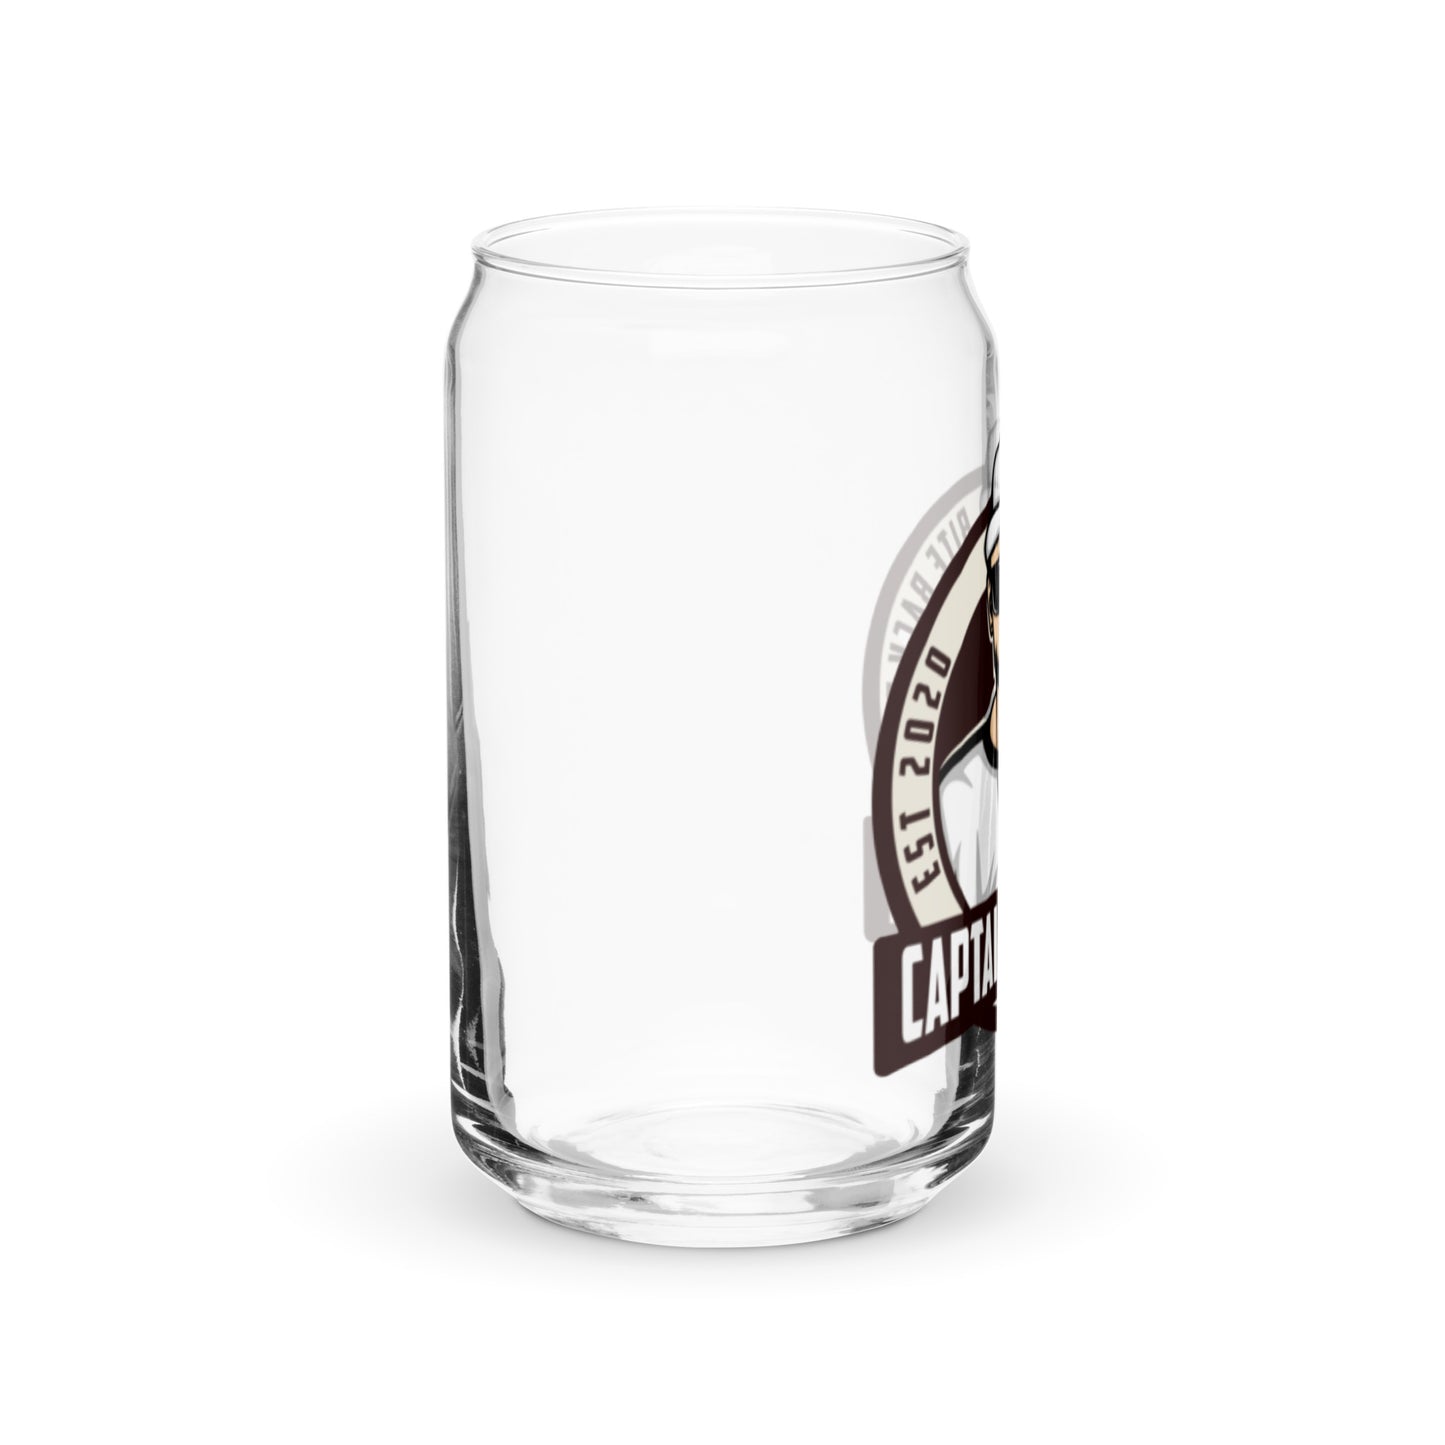 Captain Brandon Can-shaped glass